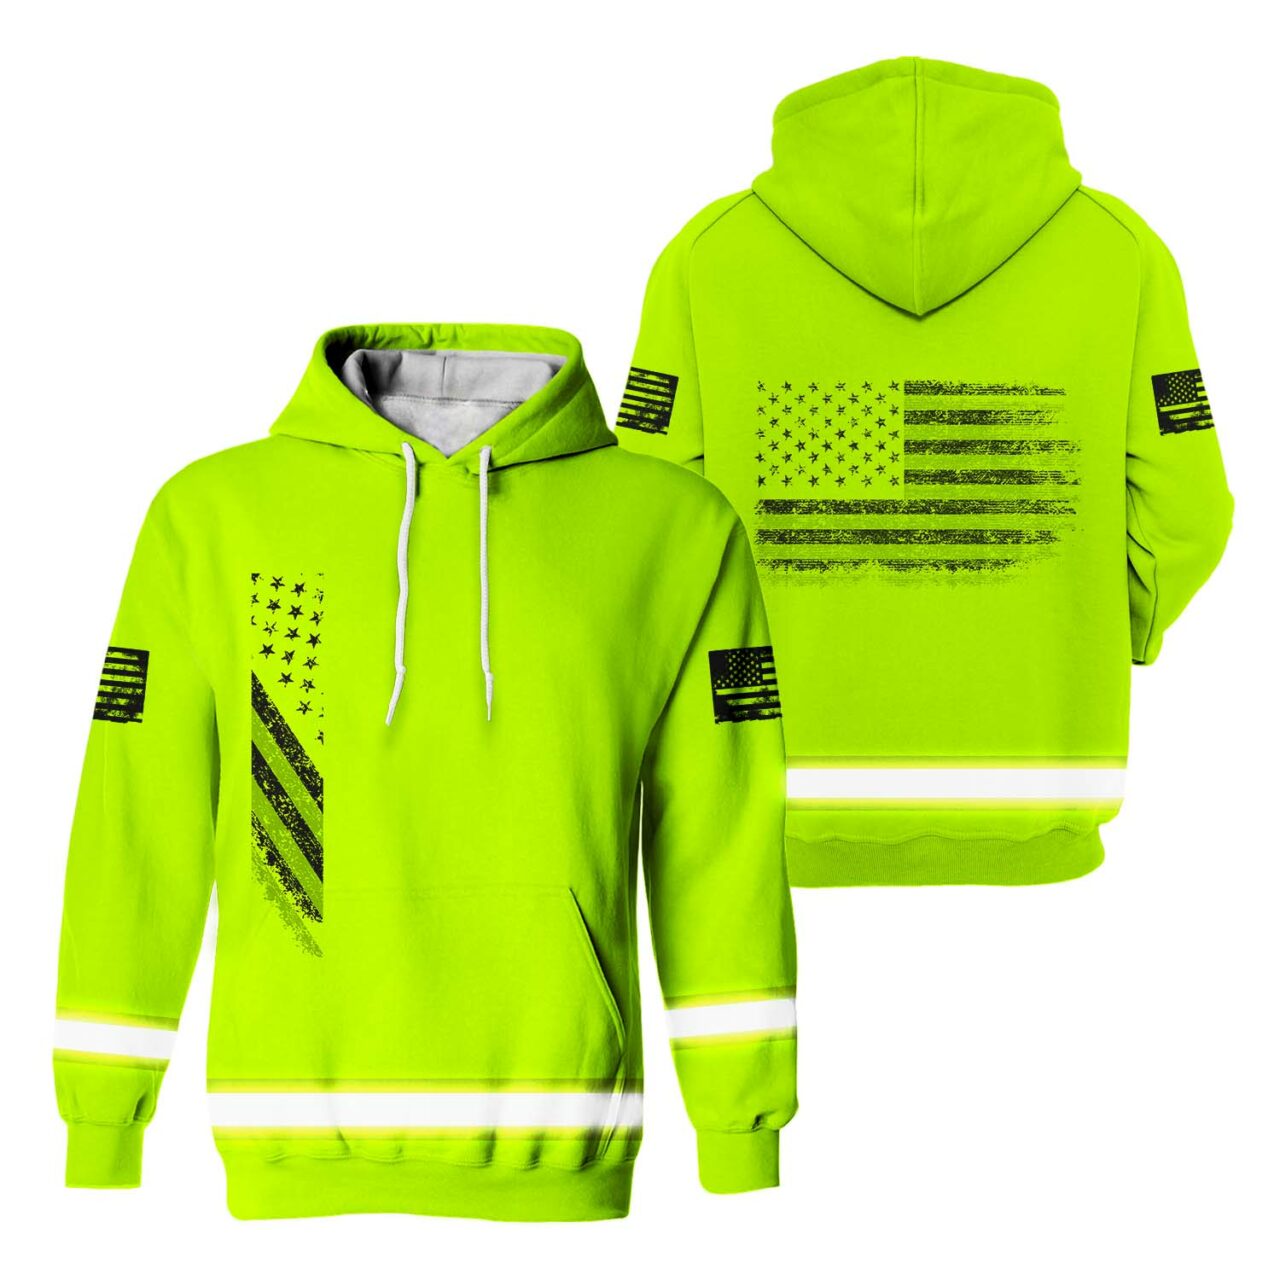 Hi Hoodie Reflective USA Lime Runners, Flag Vis Cyclists Workers, Workwear Black For Safety